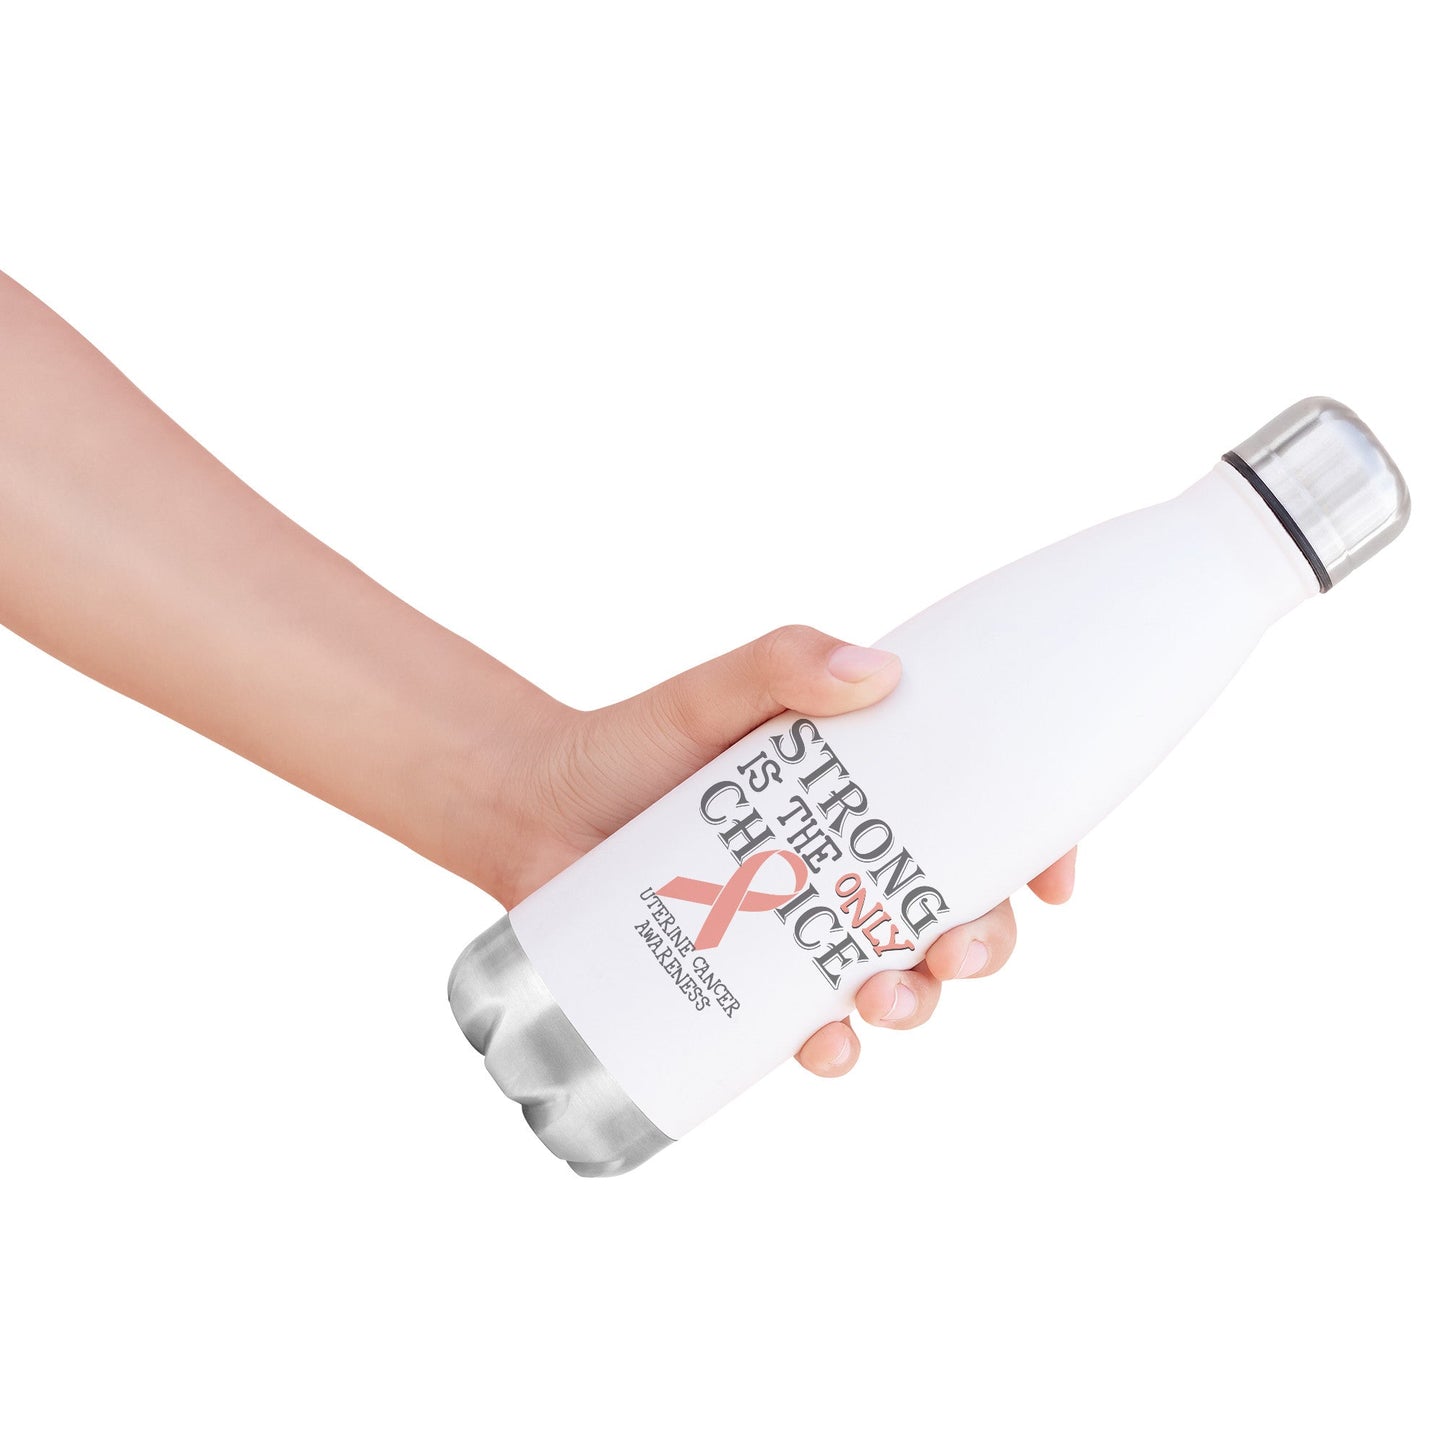 Strong is the Only Choice -Uterine Cancer Awareness 20oz Insulated Water Bottle |x|